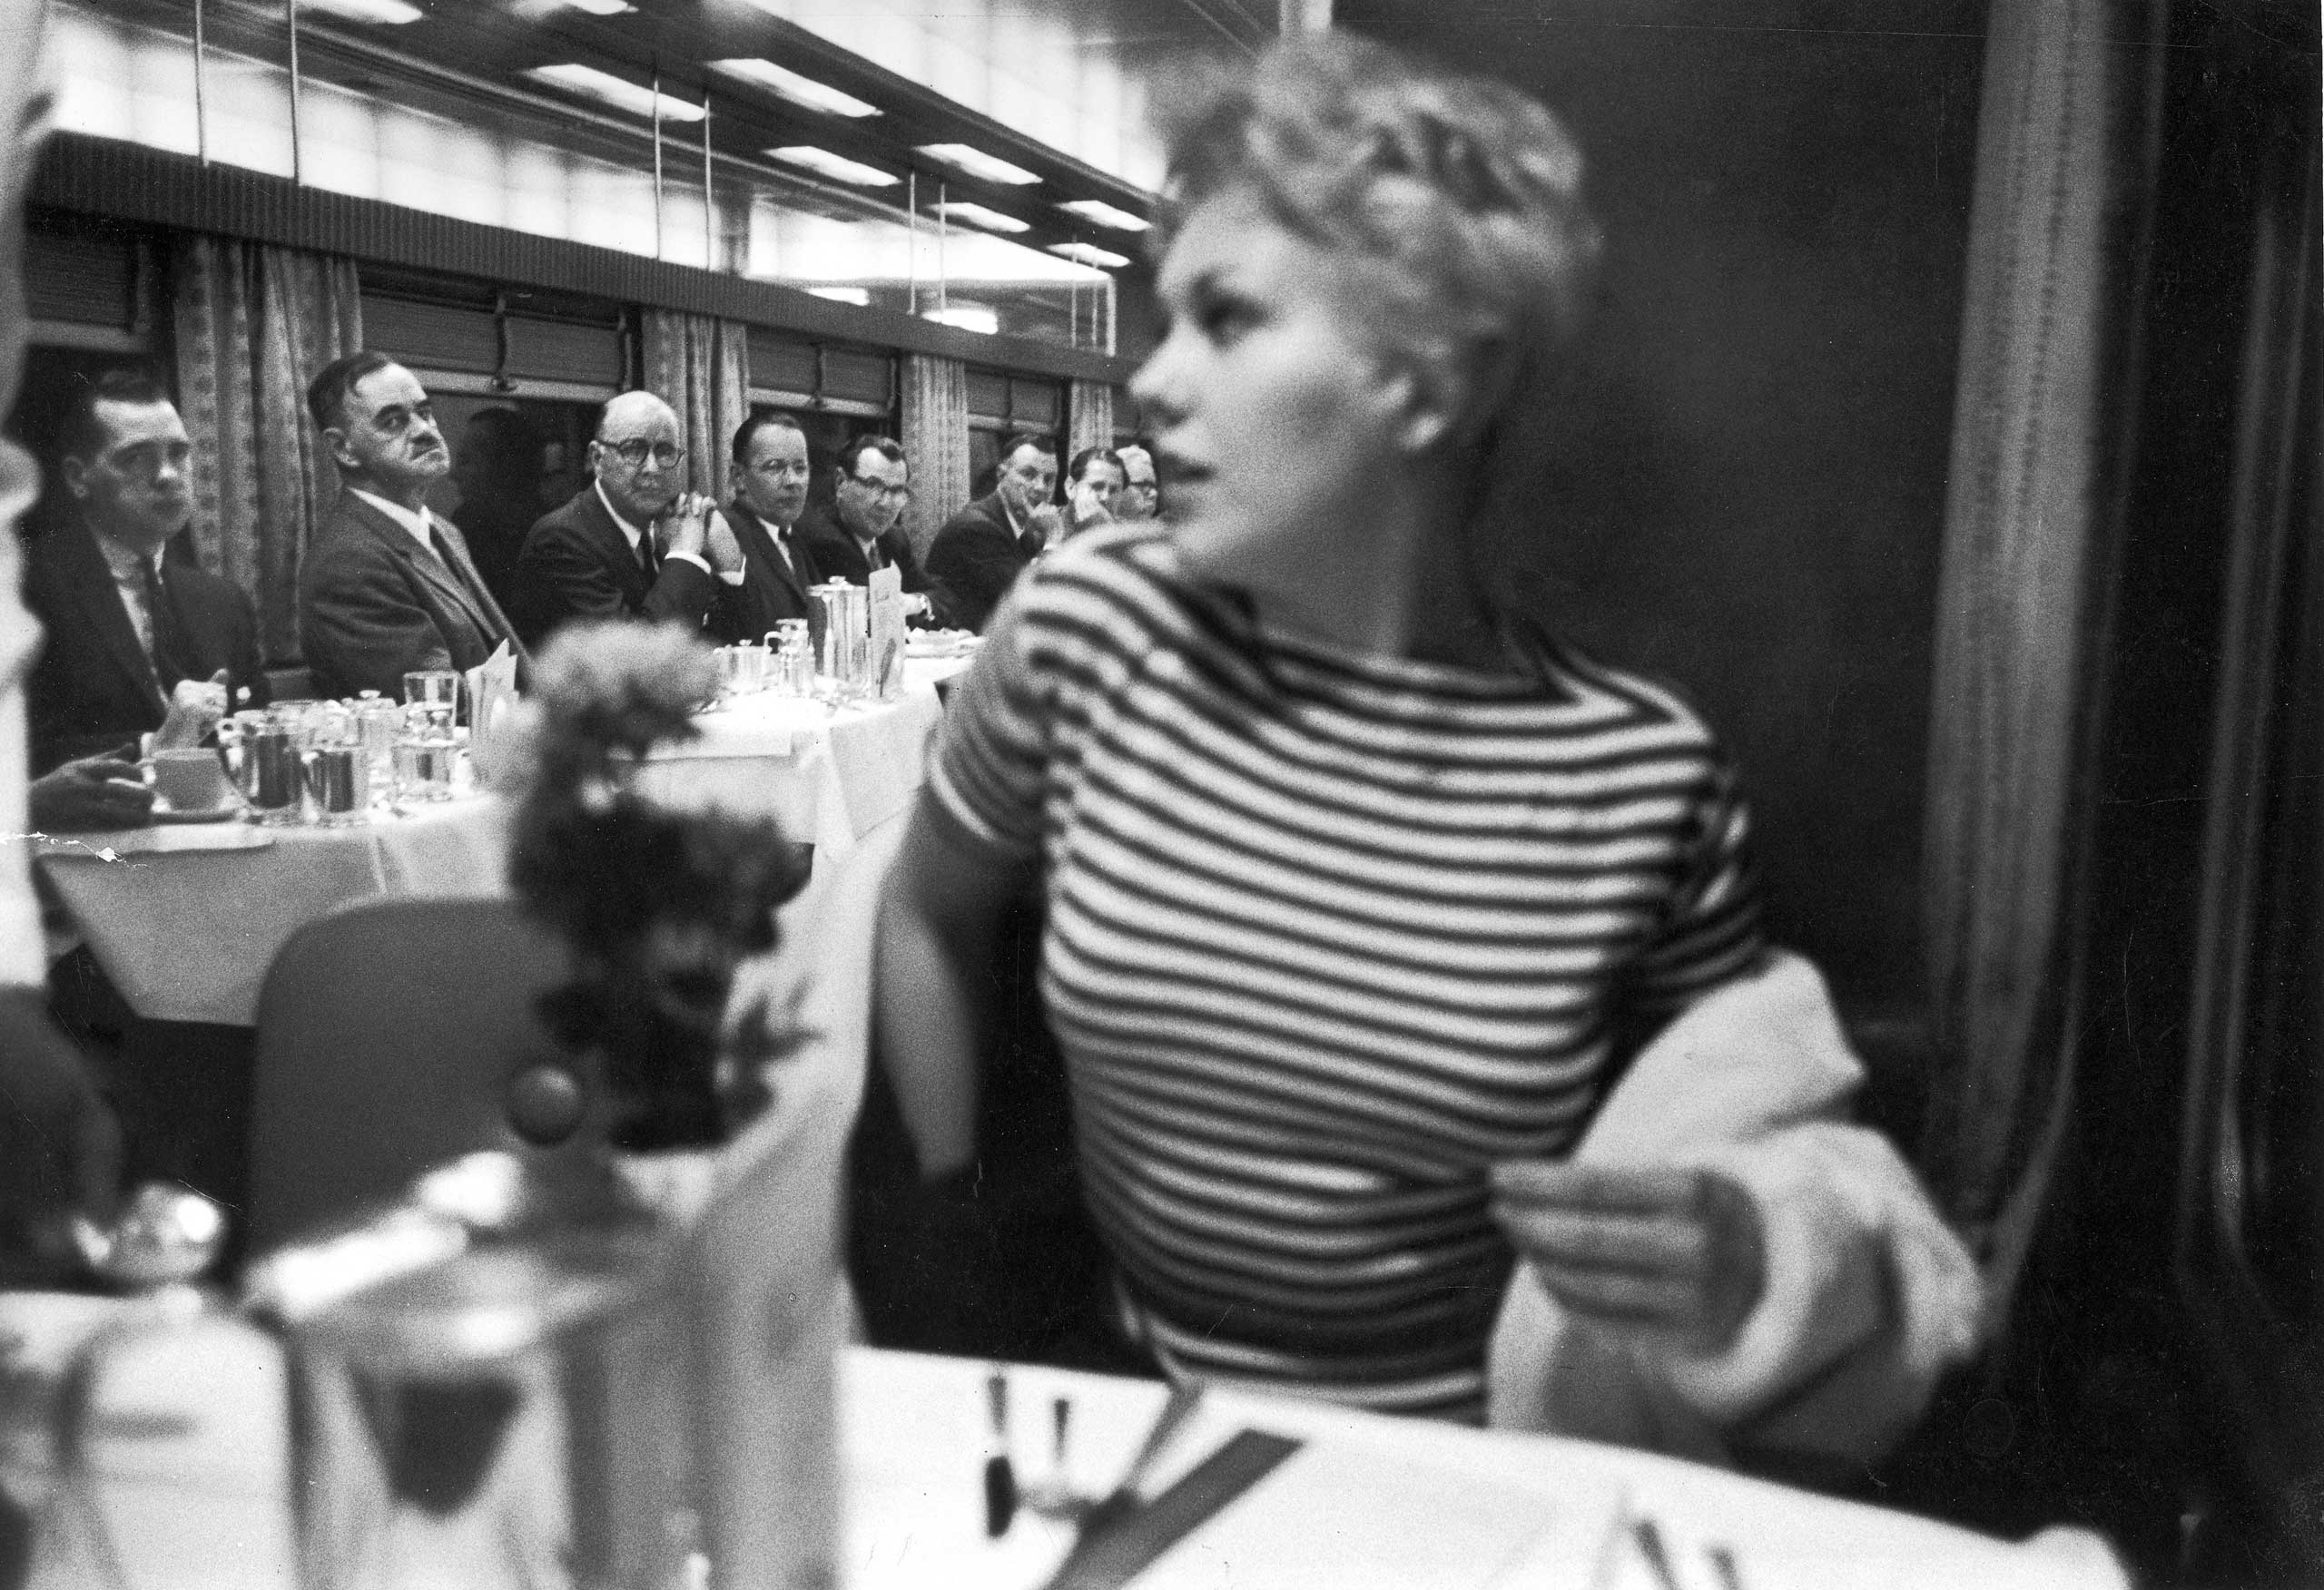 1956 |  Eyes right  is executed with near-military precision by men aboard a New York-bound 20th Century Limited train as movie star Kim Novak eases into her seat in the dining car. Originally published in the March 5, 1956, issue of LIFE.